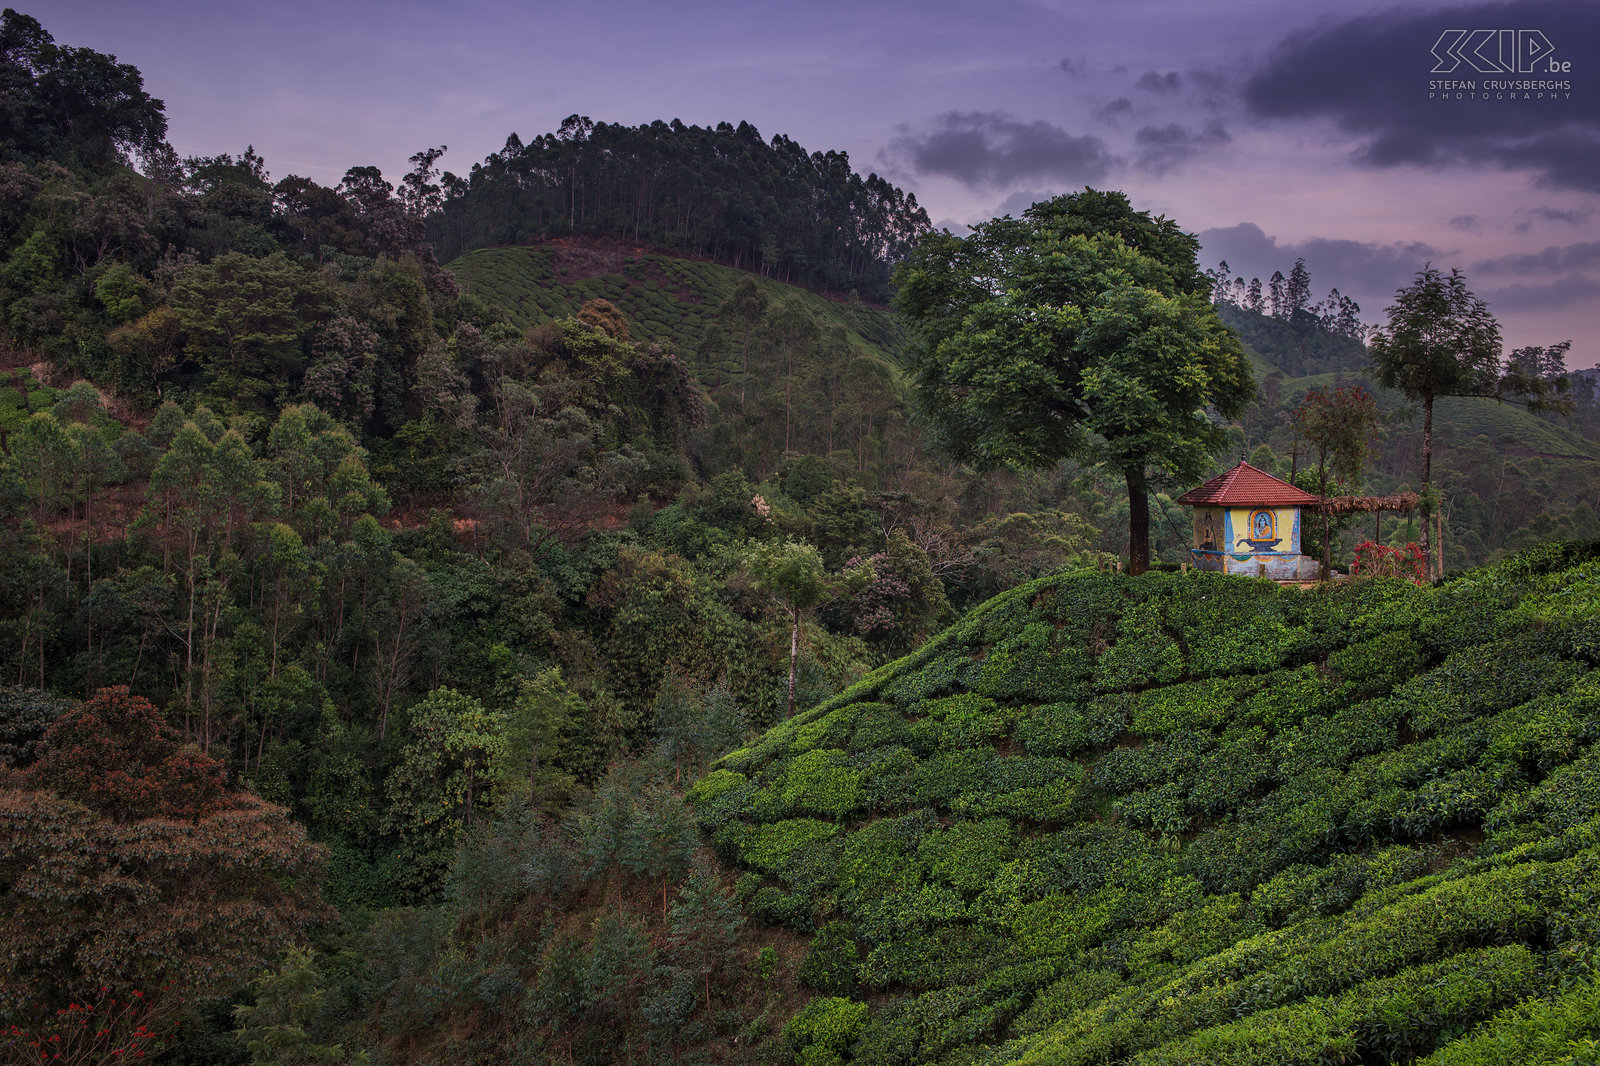 Munnar - Temple Small temple in the tea fields of Munnar after sunset. Stefan Cruysberghs